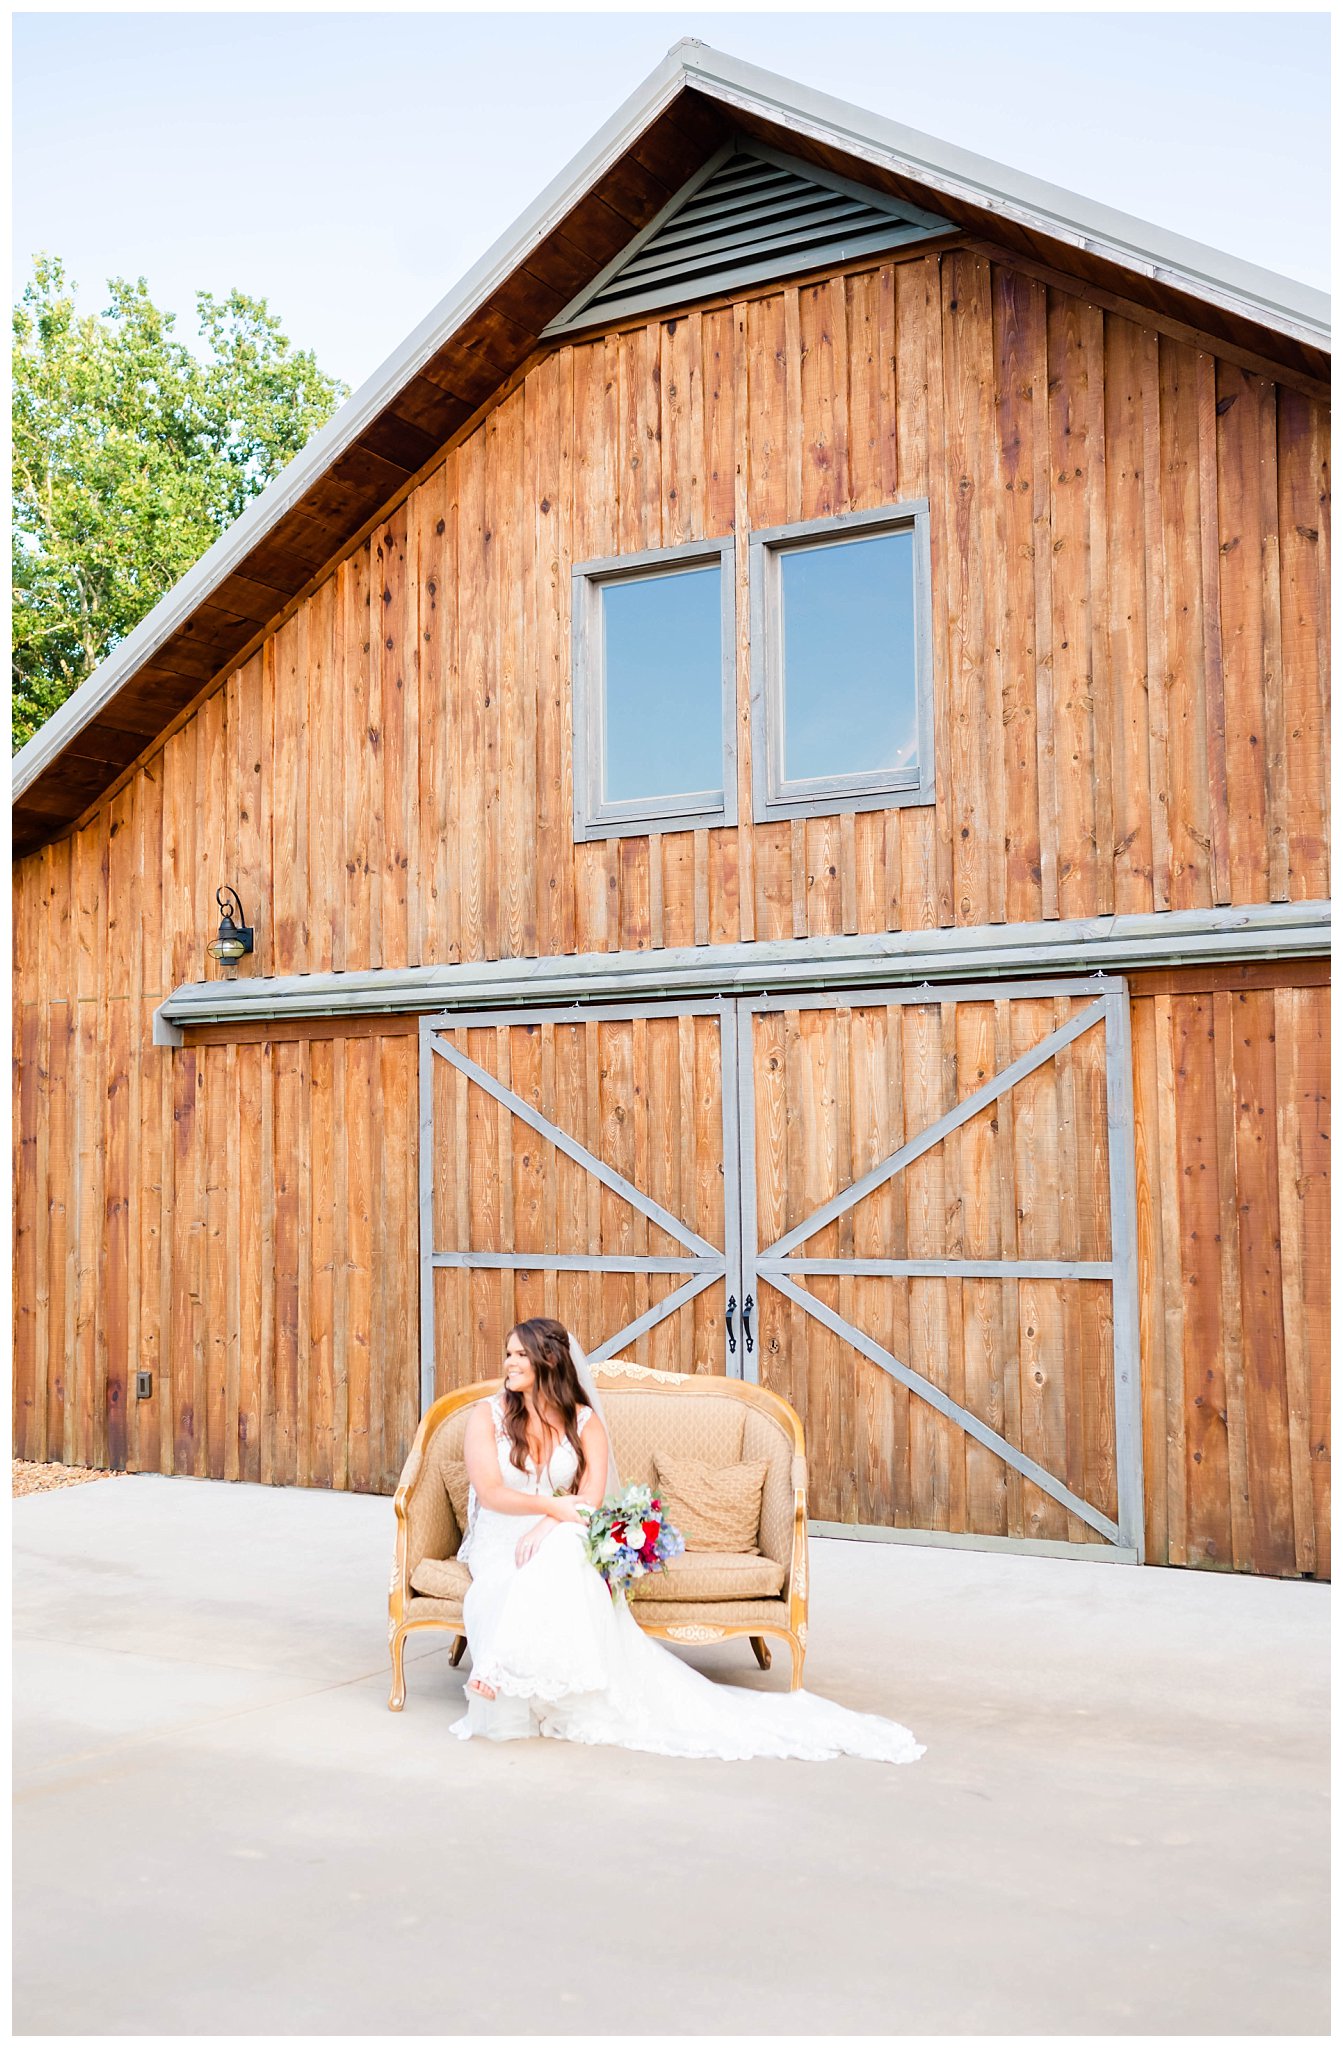 Nicole posing in front of barn for her rustic bridal portraits